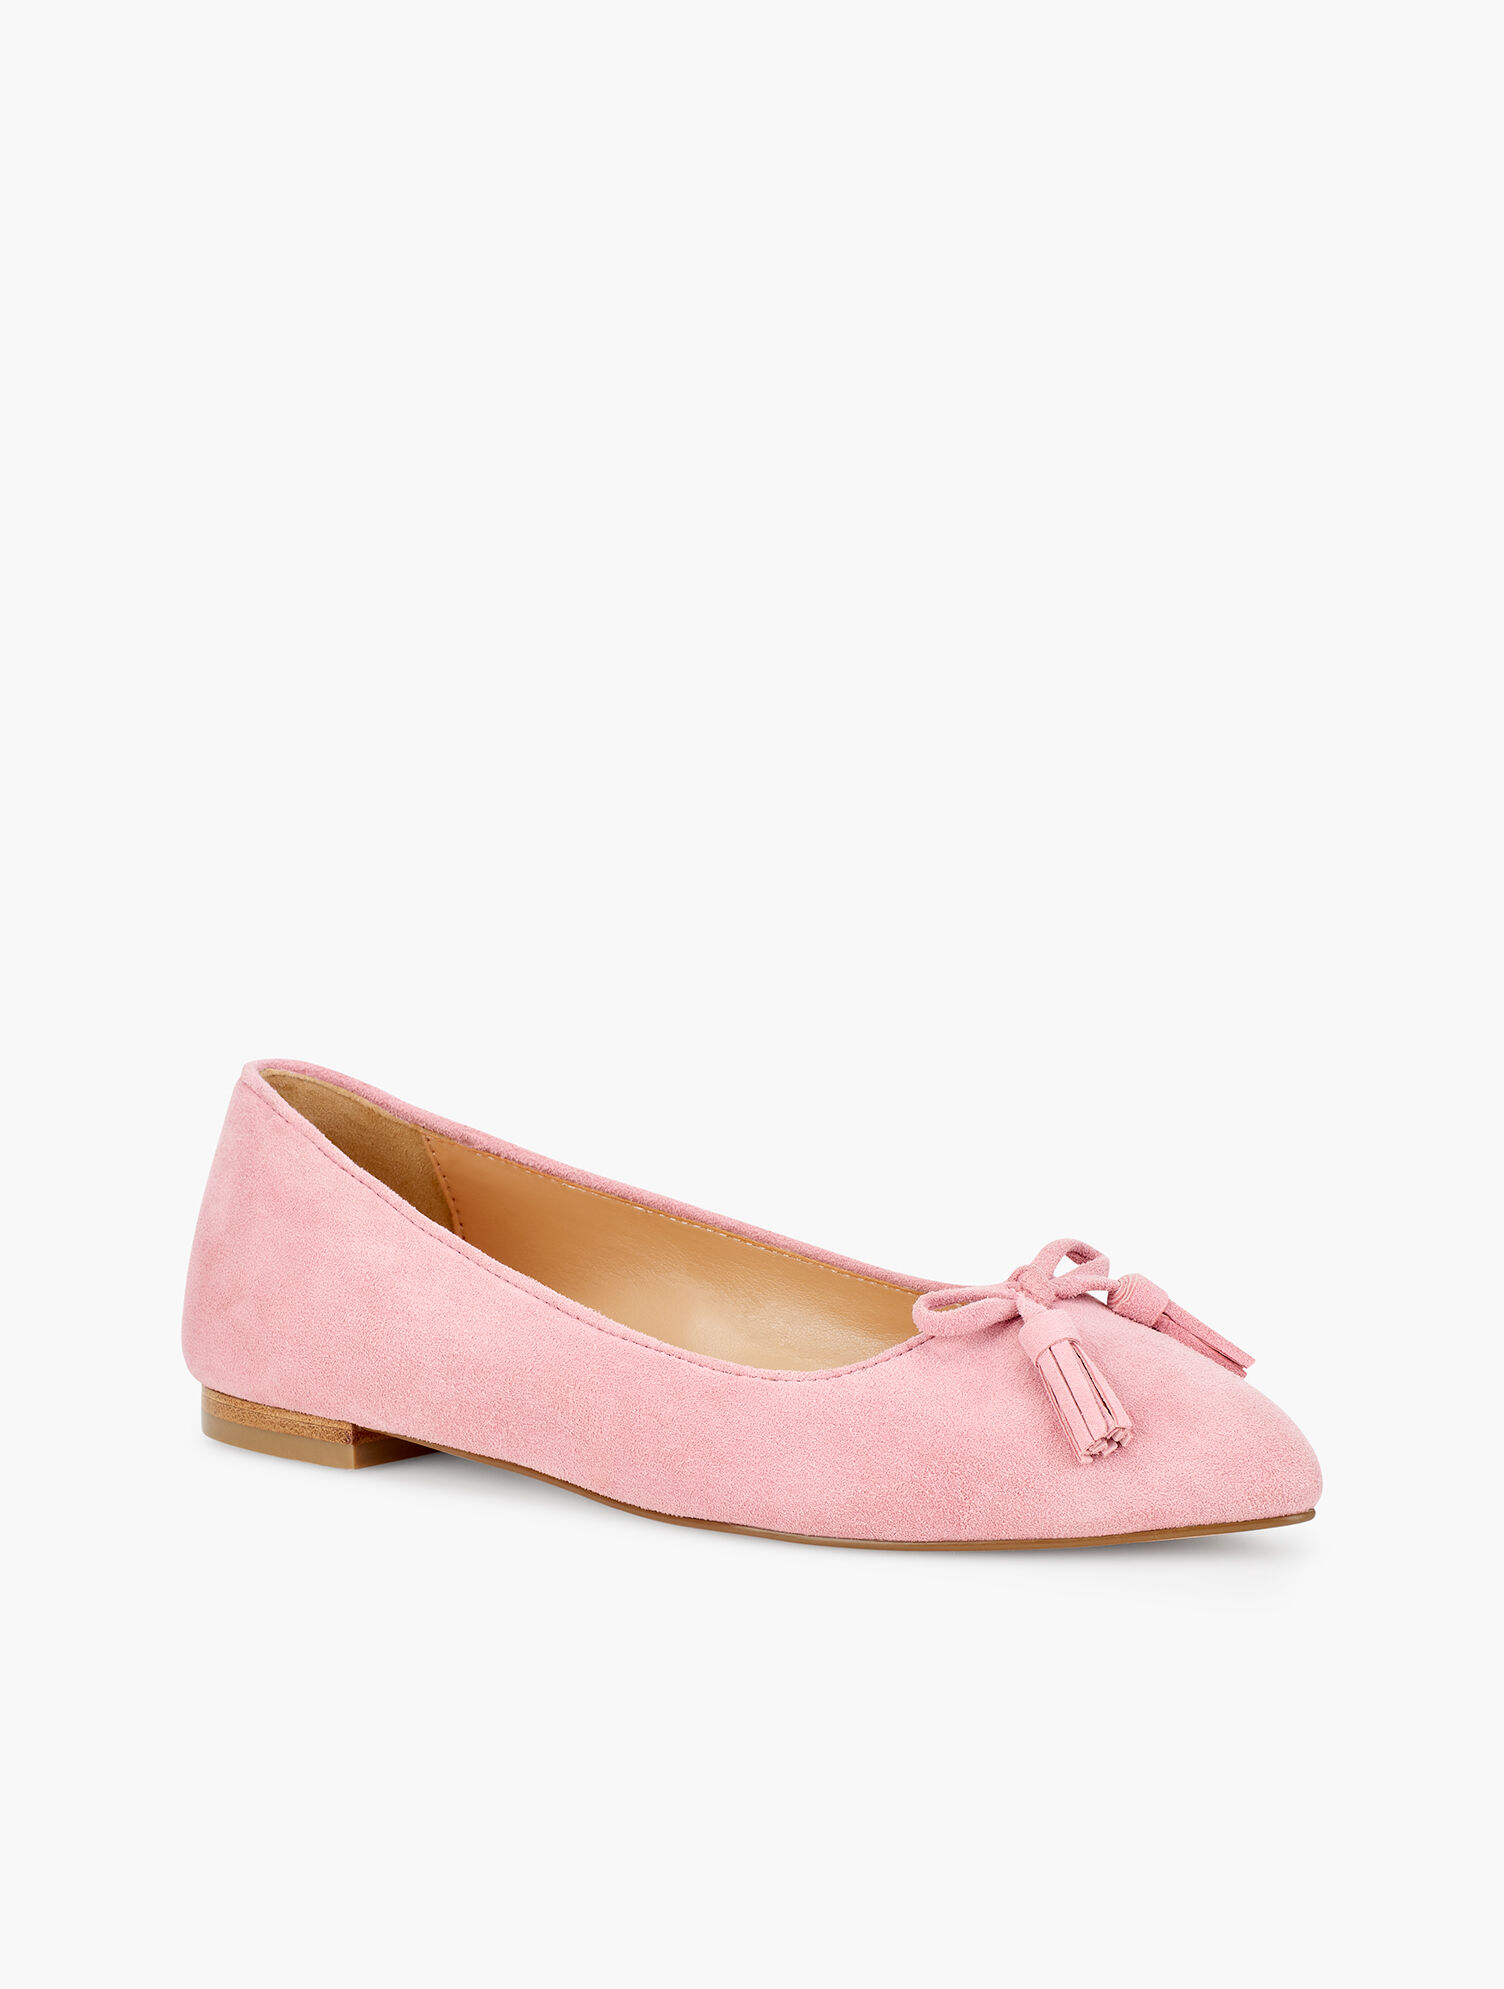 Poppy Bow Flats - Suede | Talbots